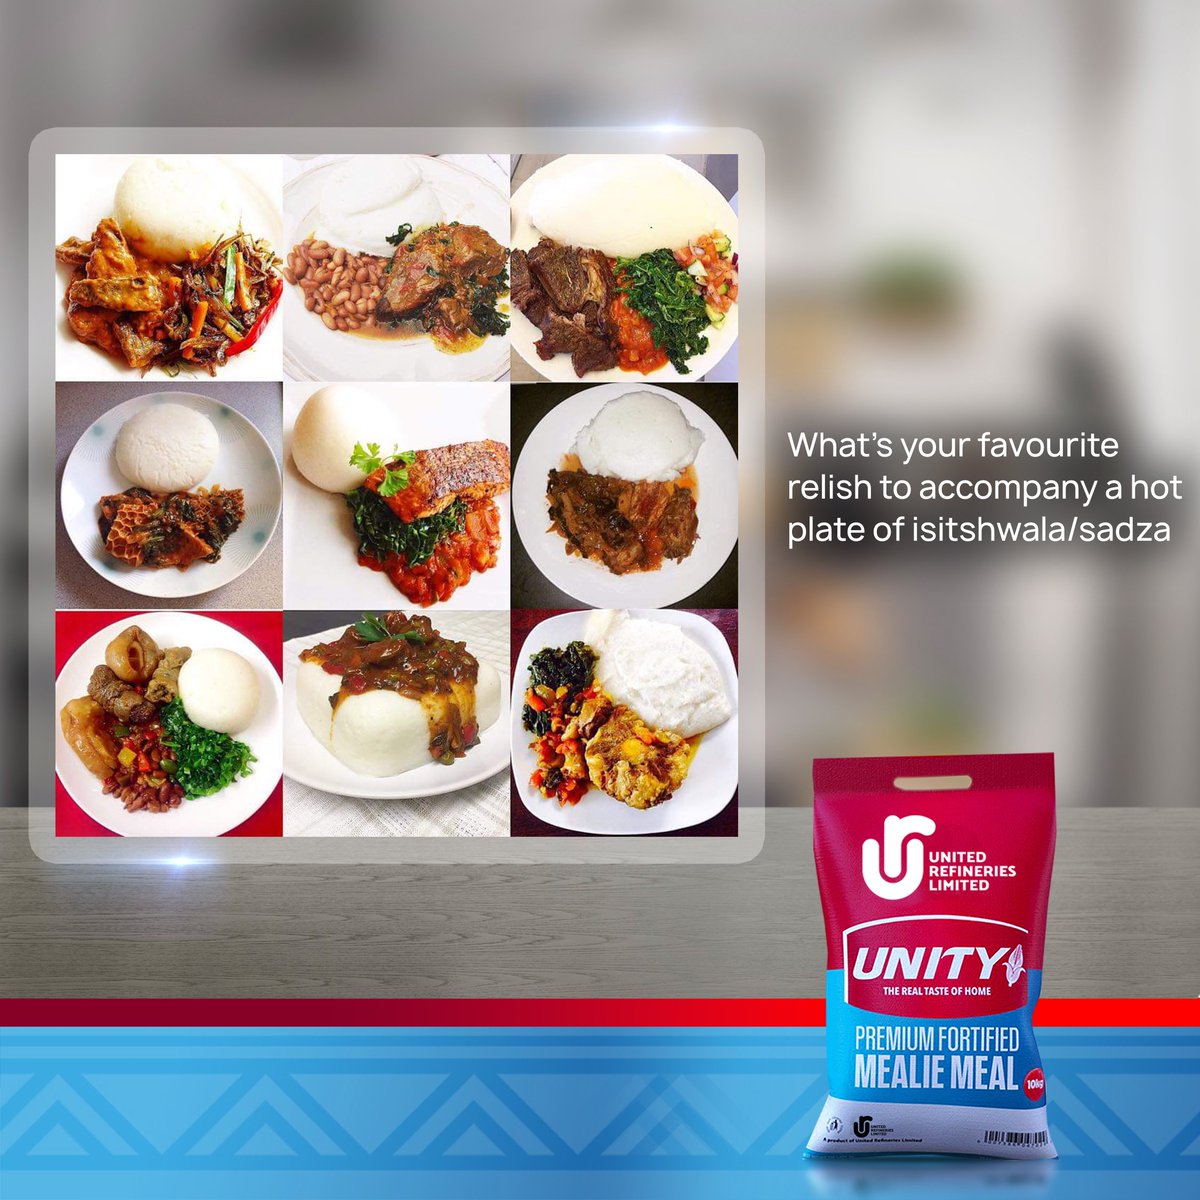 What's your favorite relish to accompany a hot plate of isitshwala/sadza. #unity #lunchtime